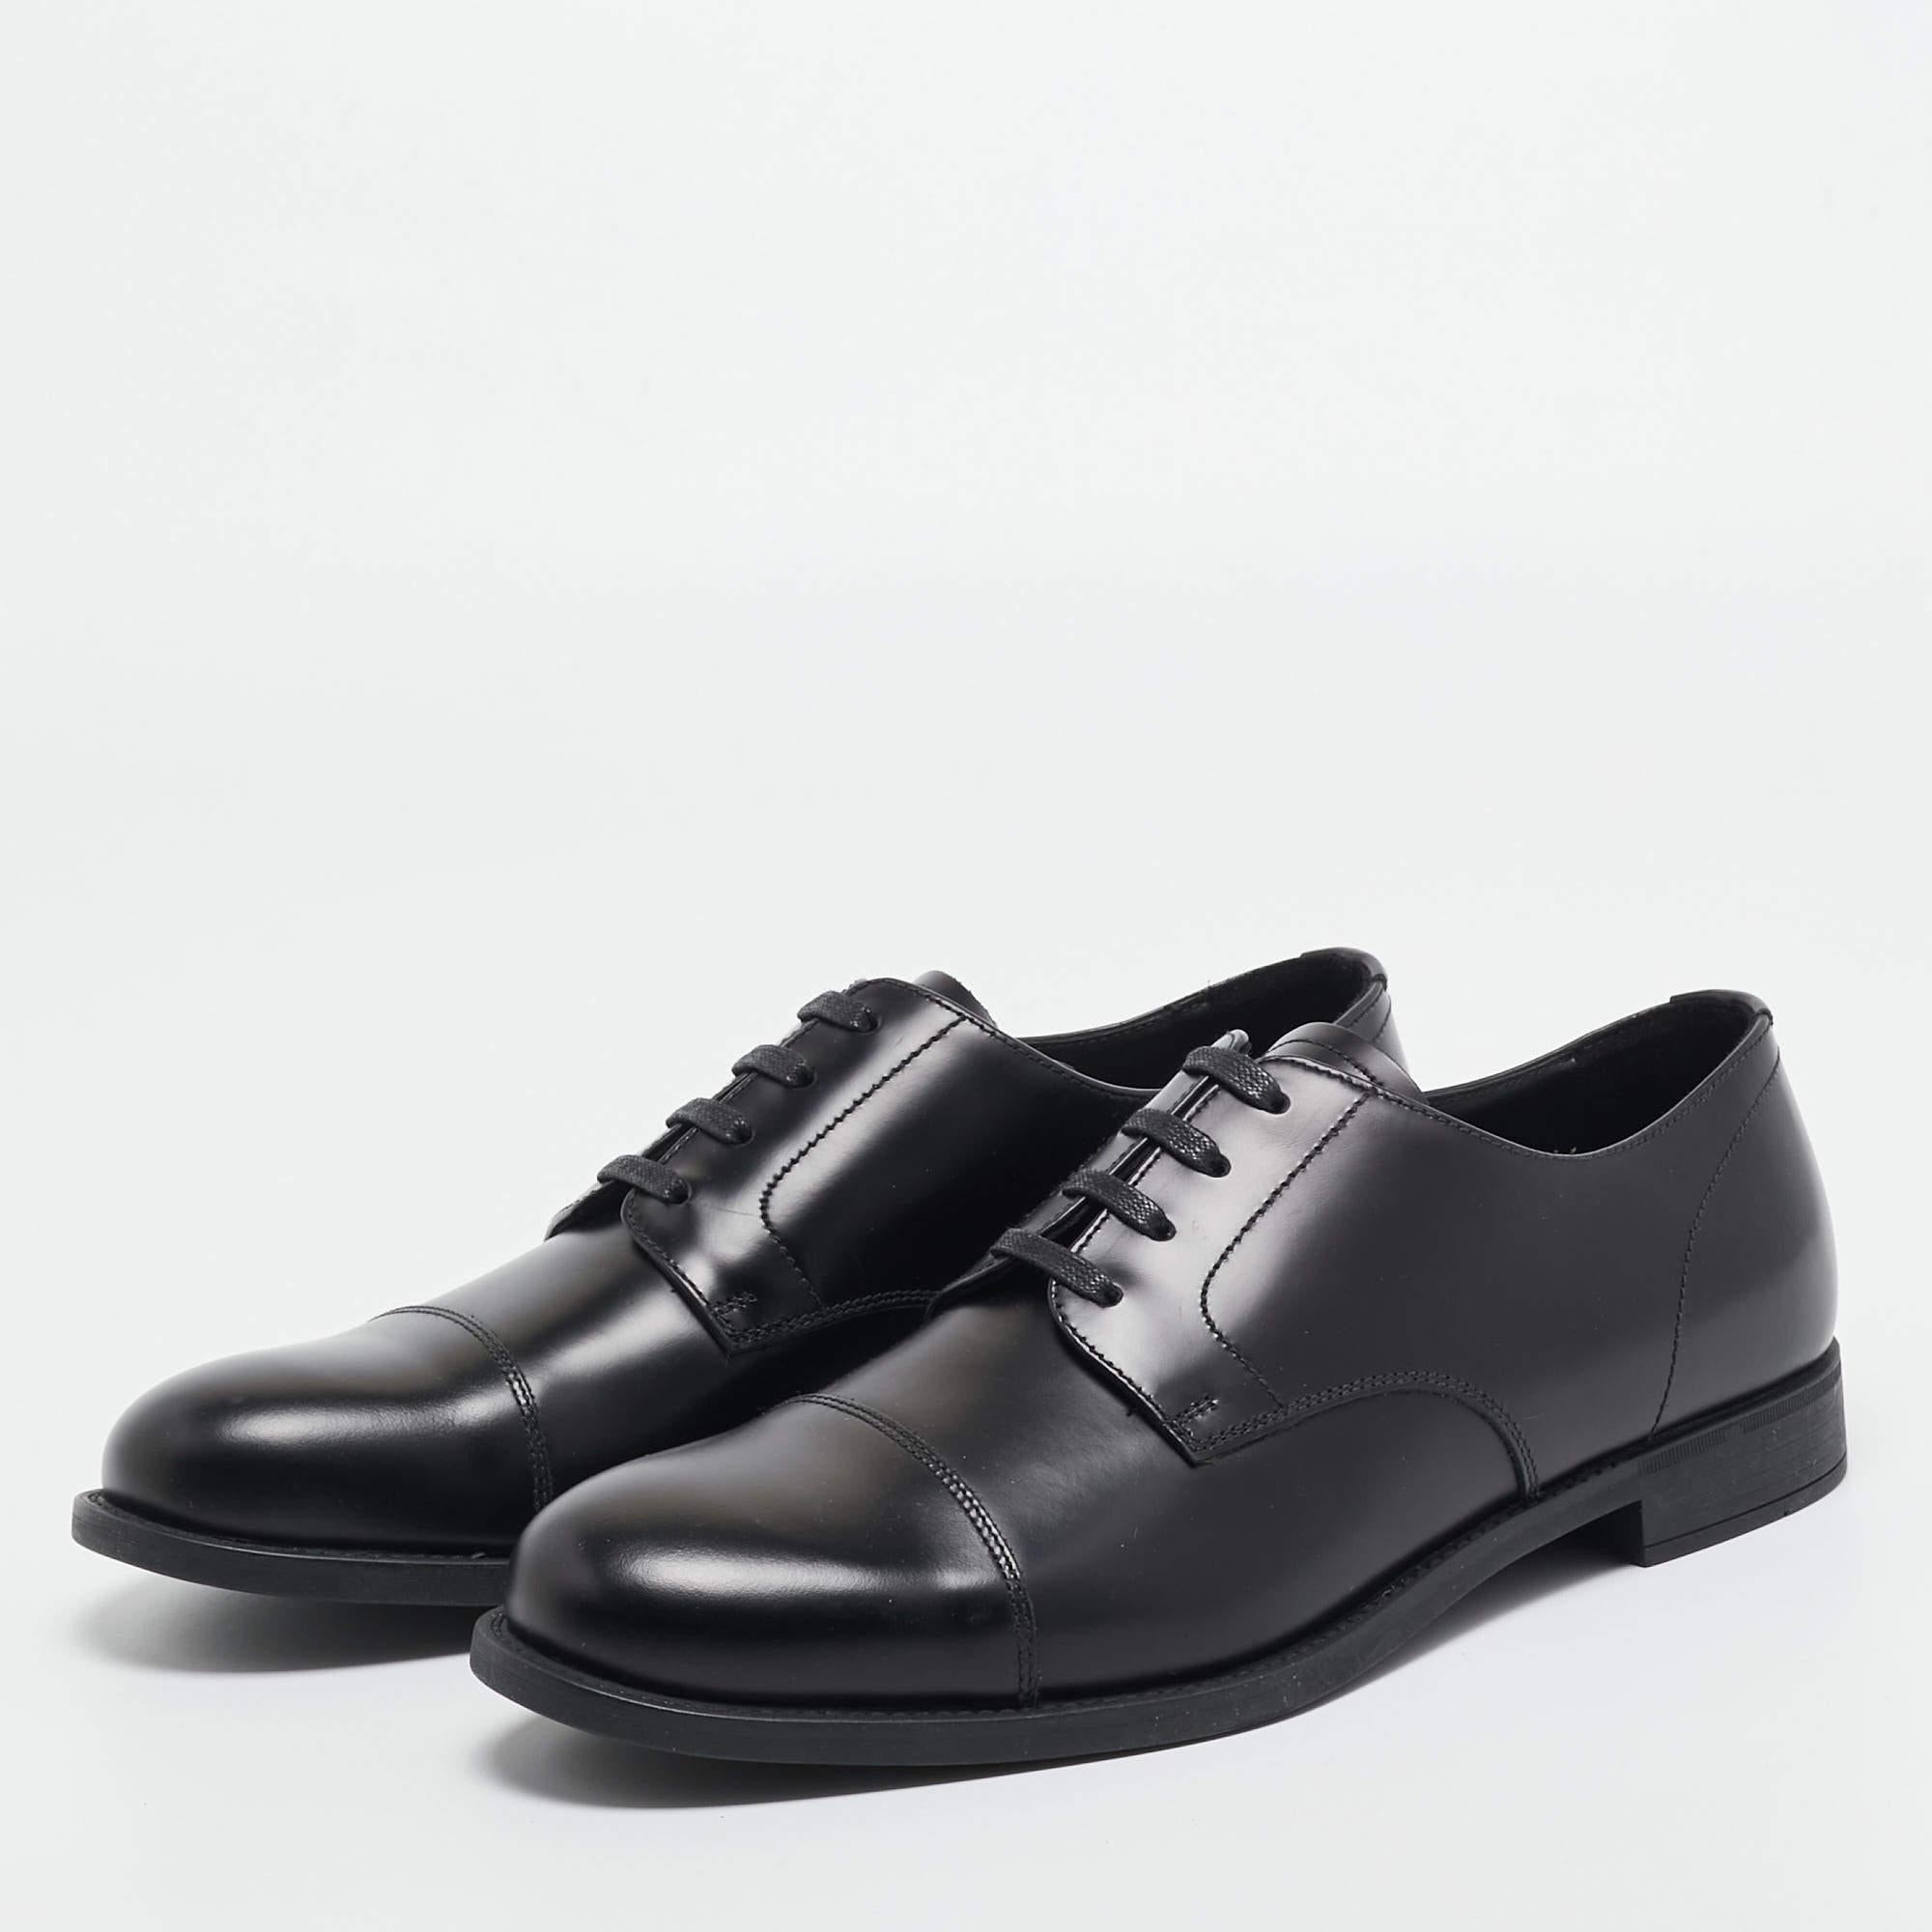 These derby shoes from Prada are meant to offer a refined look. Crafted with skill using black leather, they flaunt simple tie-ups and durable soles.

